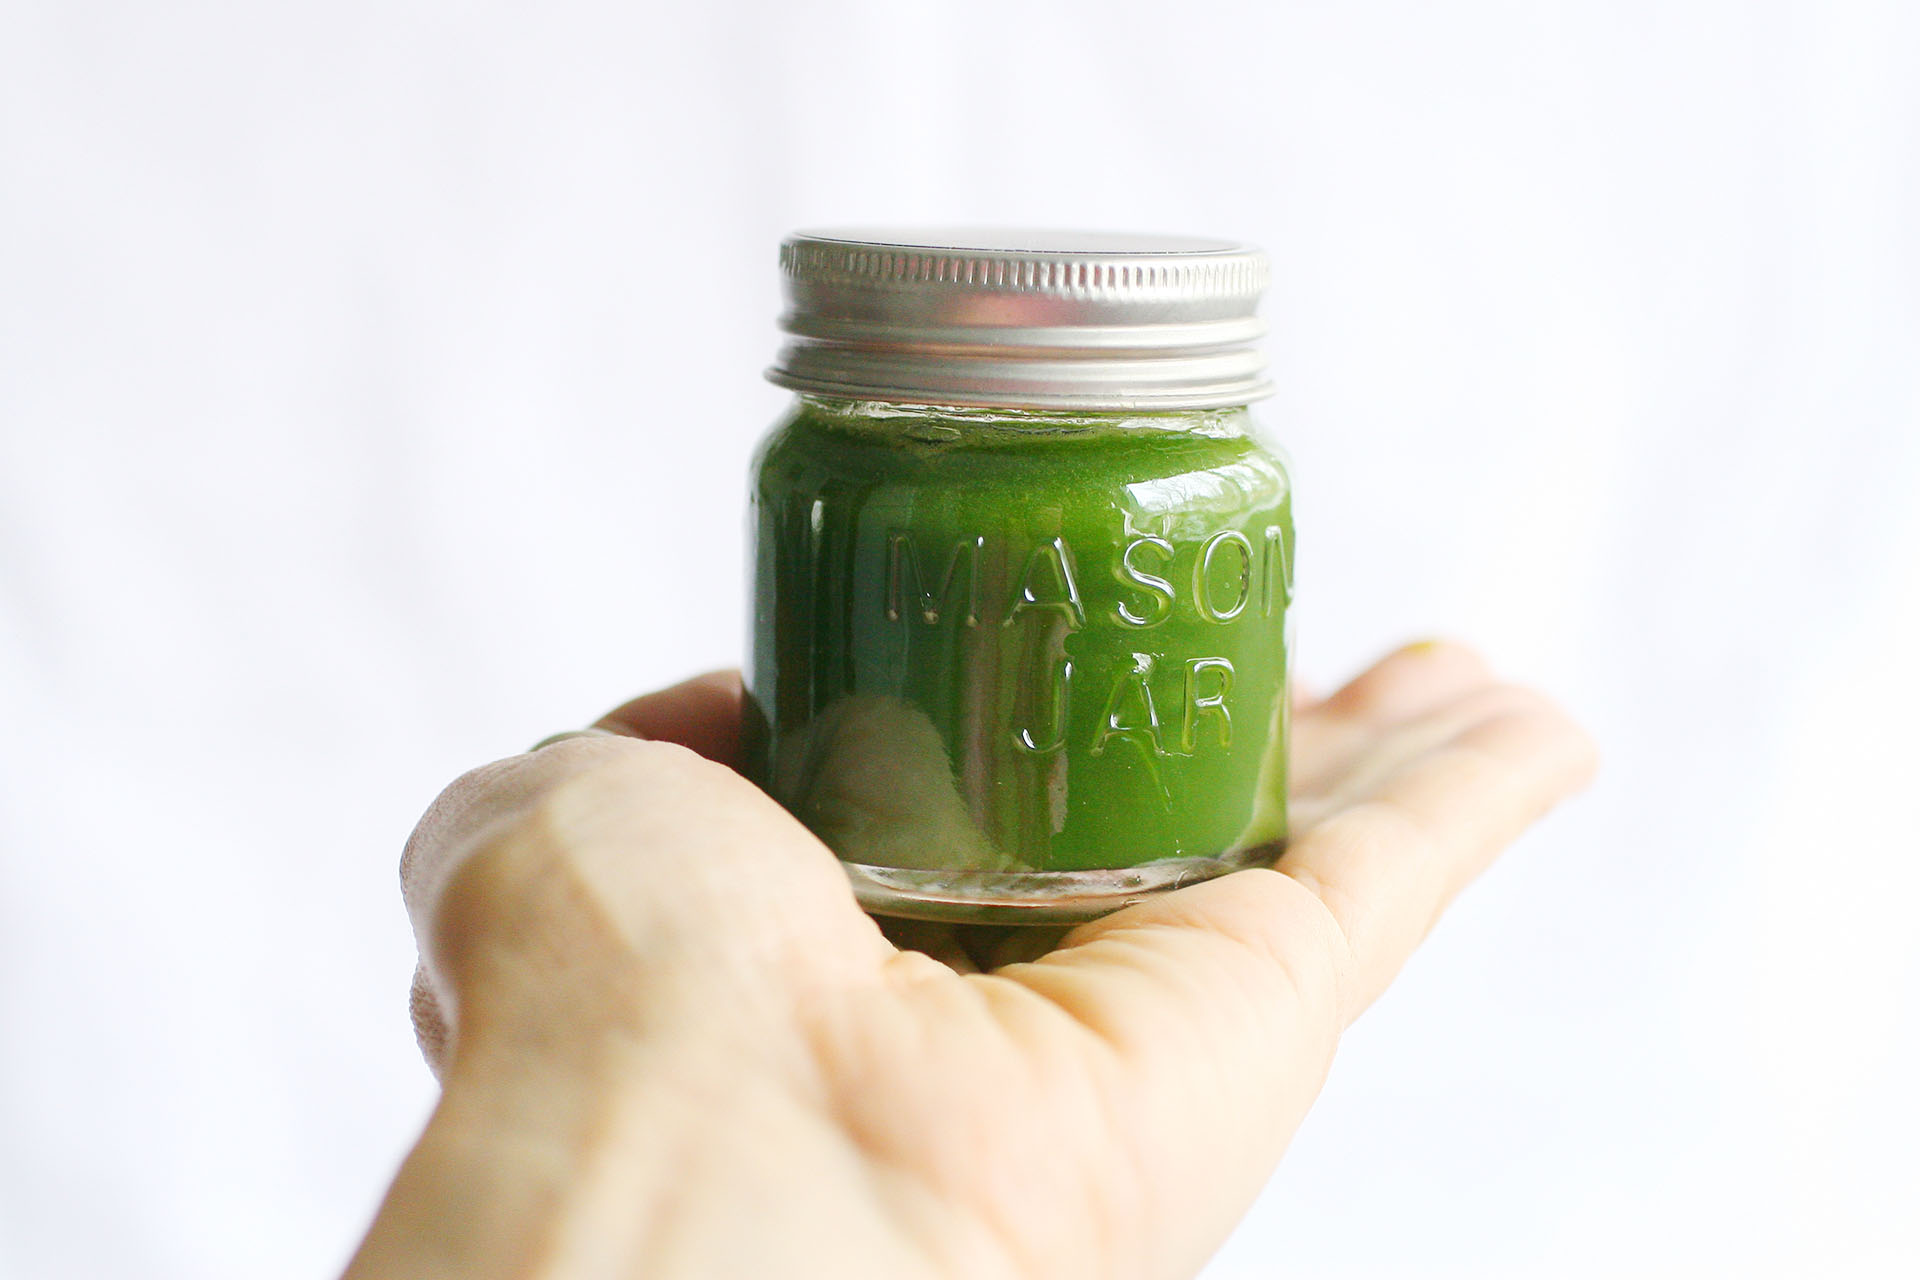 A jar of green food coloring sitting on an outstretched palm.